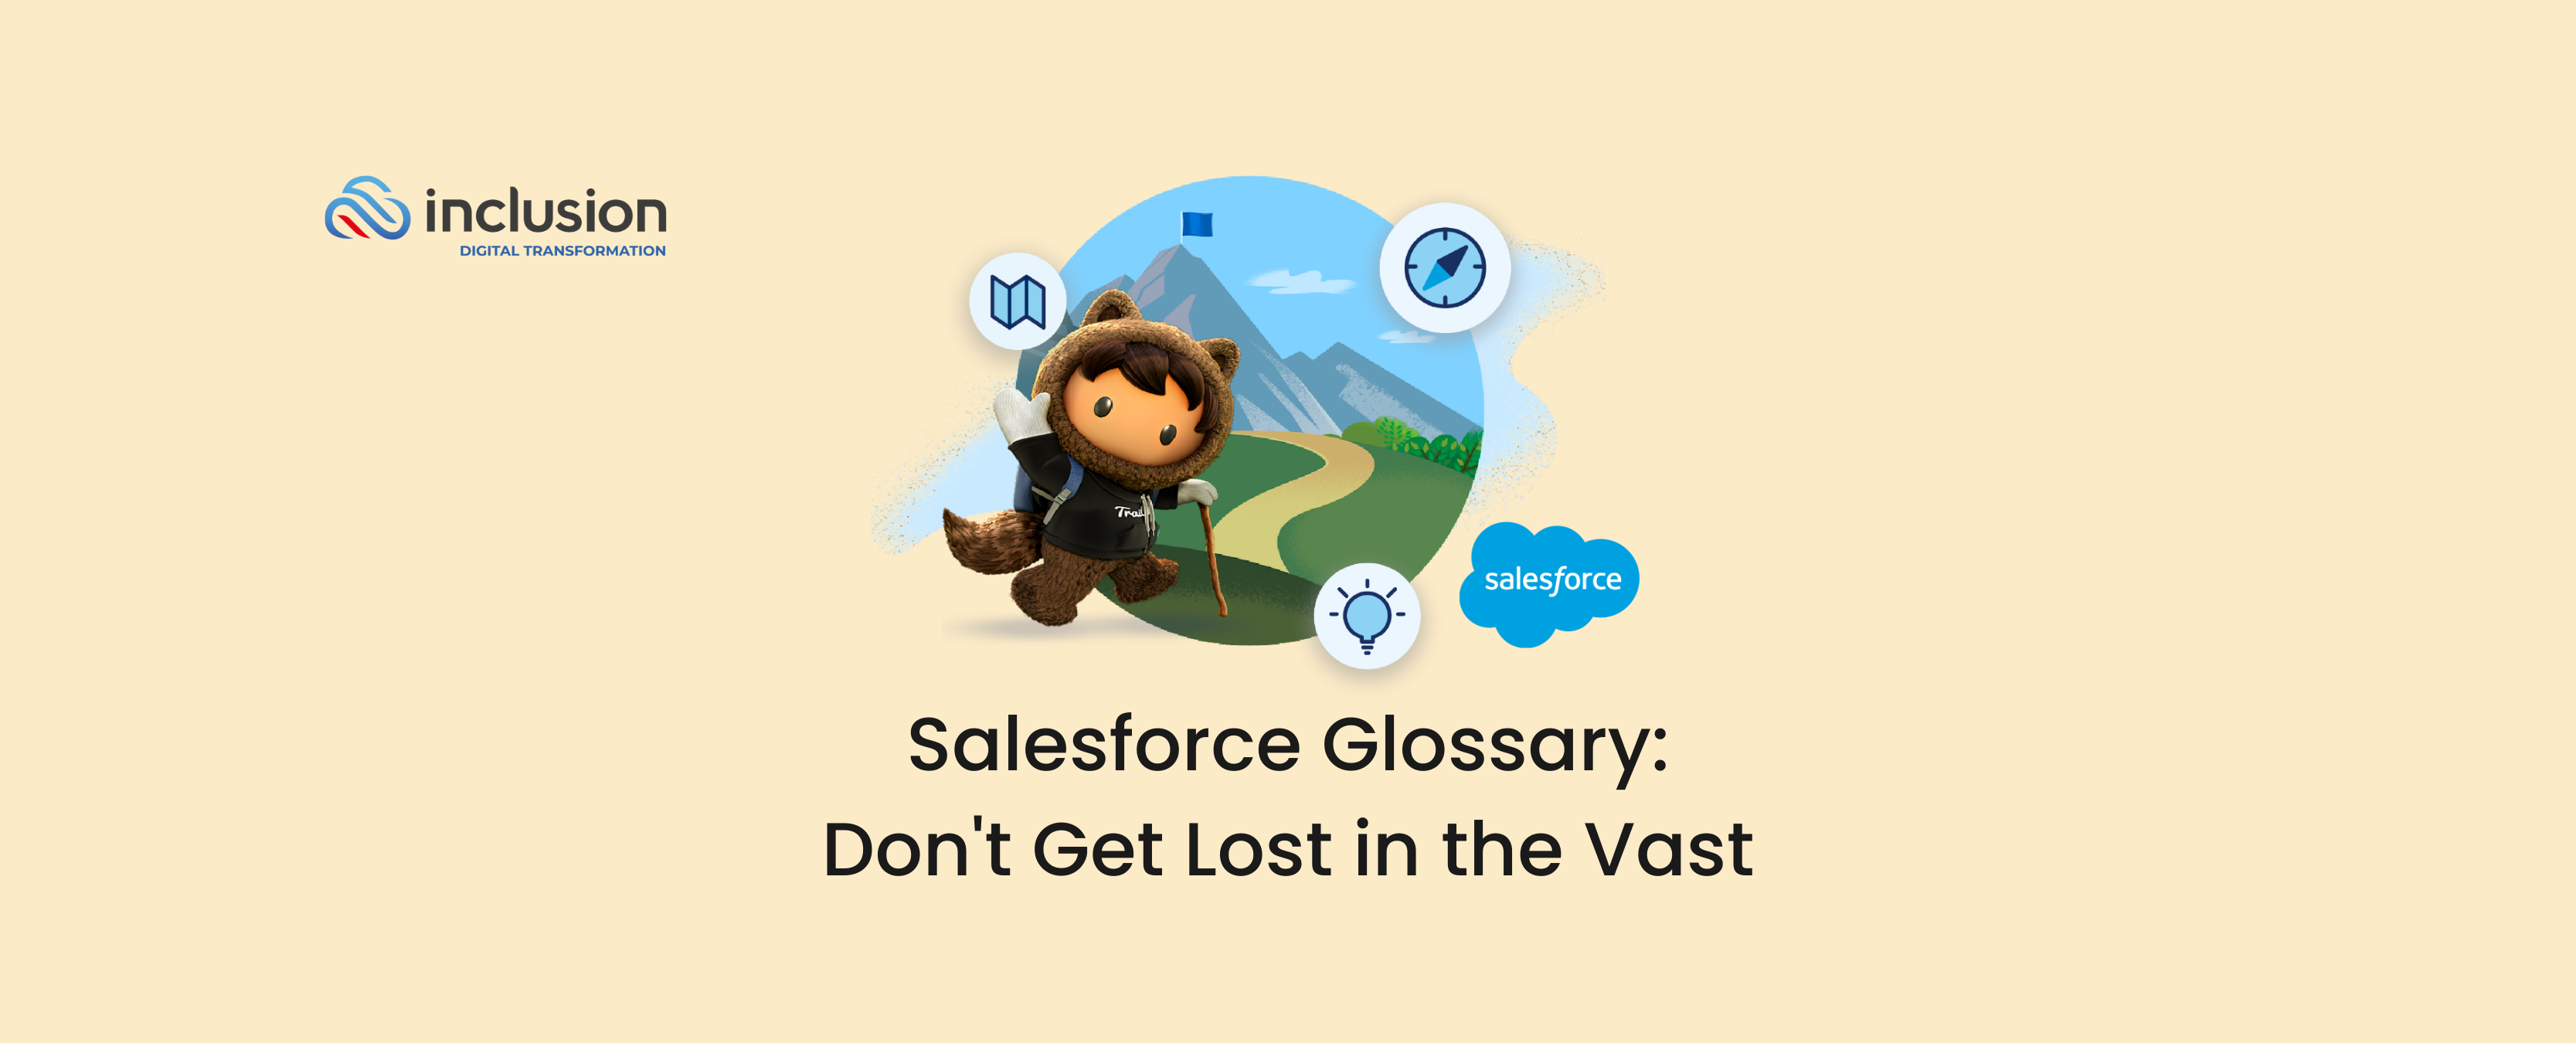 Salesforce Glossary Don't Get Lost in the Vast and Become a Trailblazer